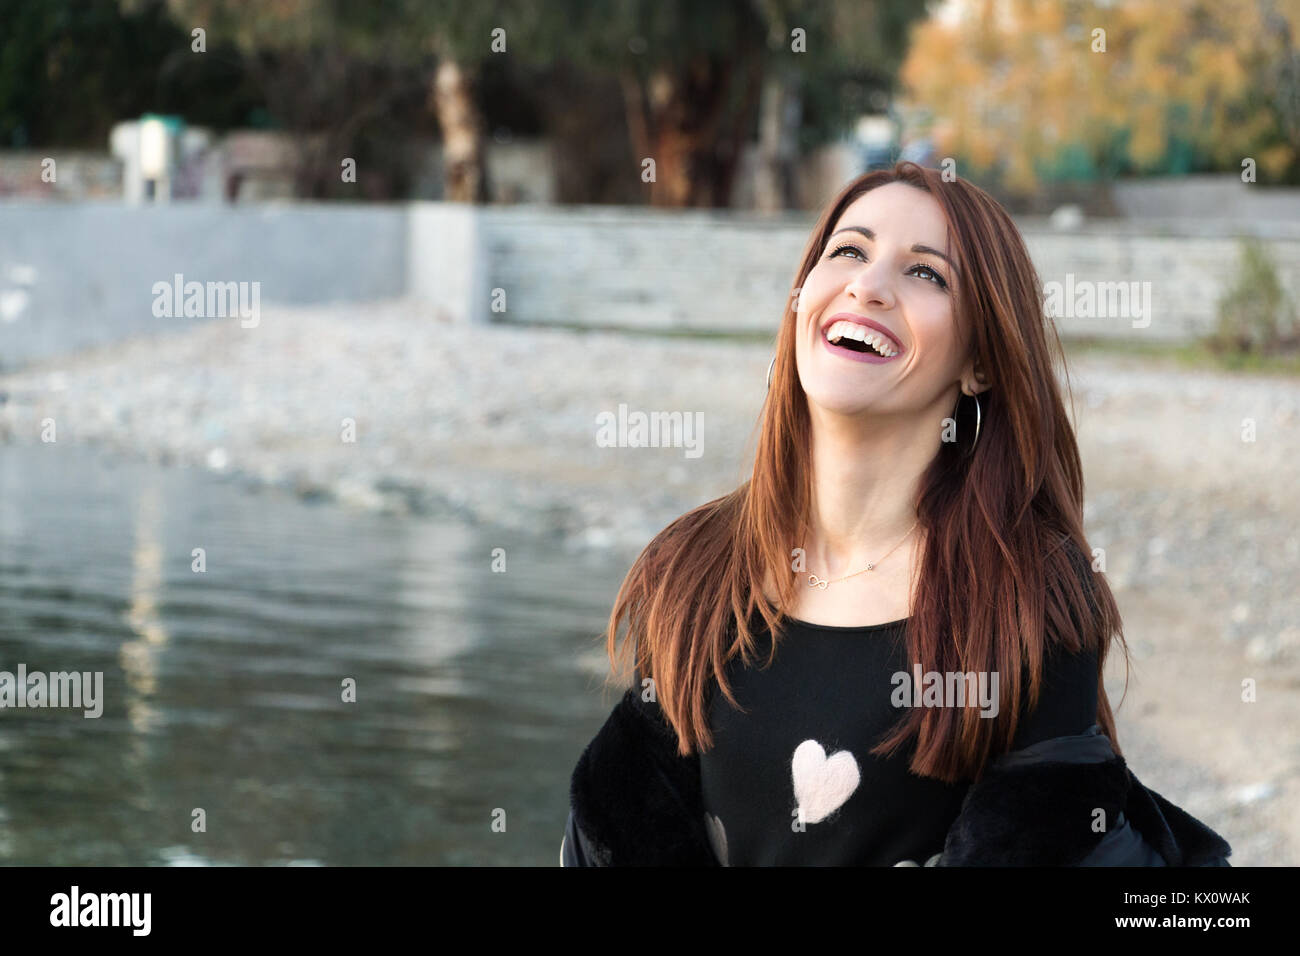 Portrait of a woman laughing spontaneously, cheerful, outdoors, looking up. Stock Photo